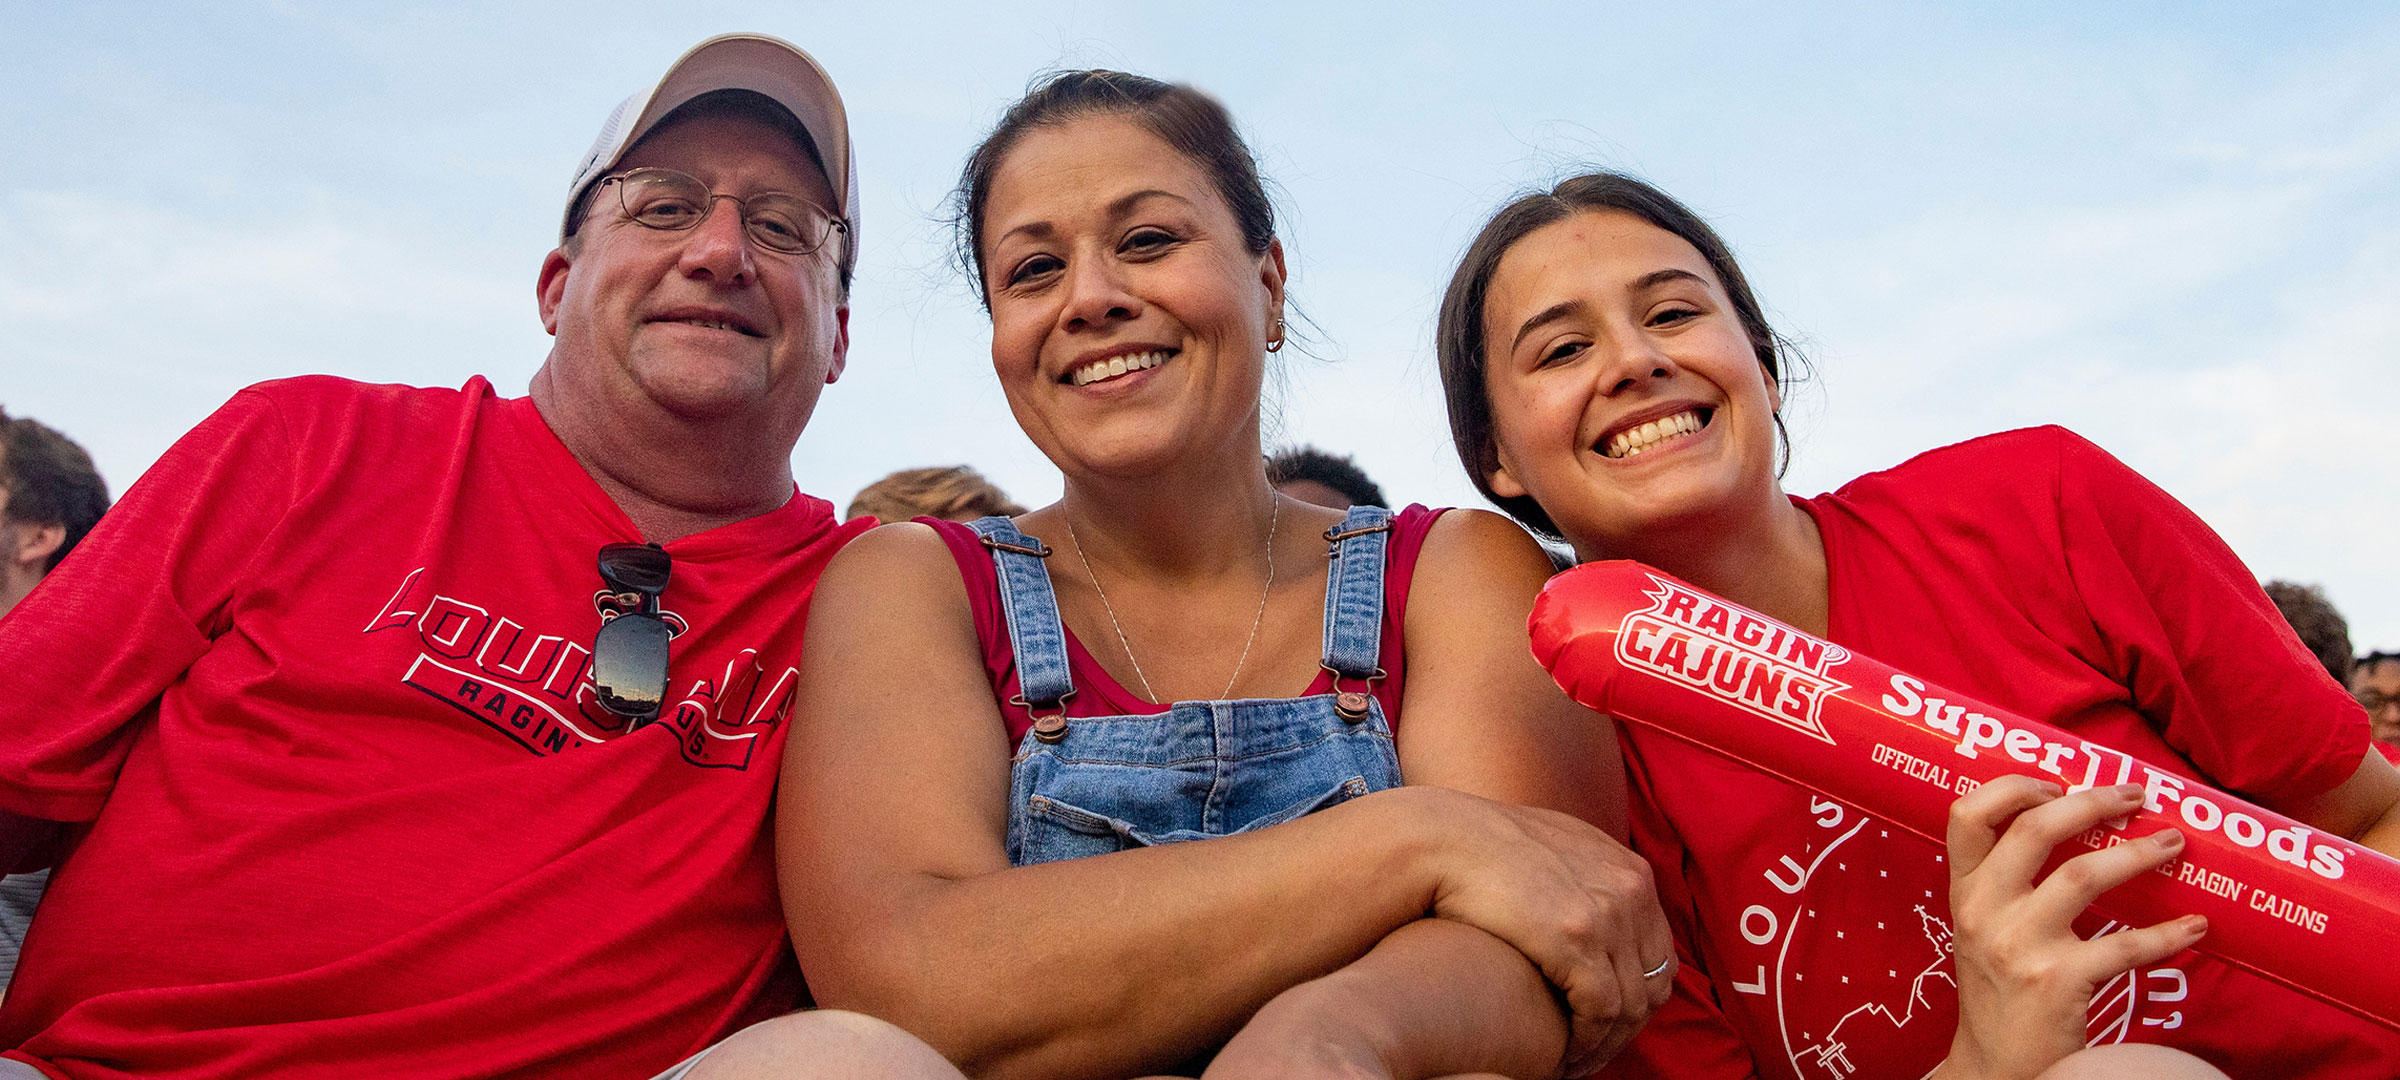 A UL 69ý student with her parents in the stands at a Louisiana Ragin' Cajuns football game